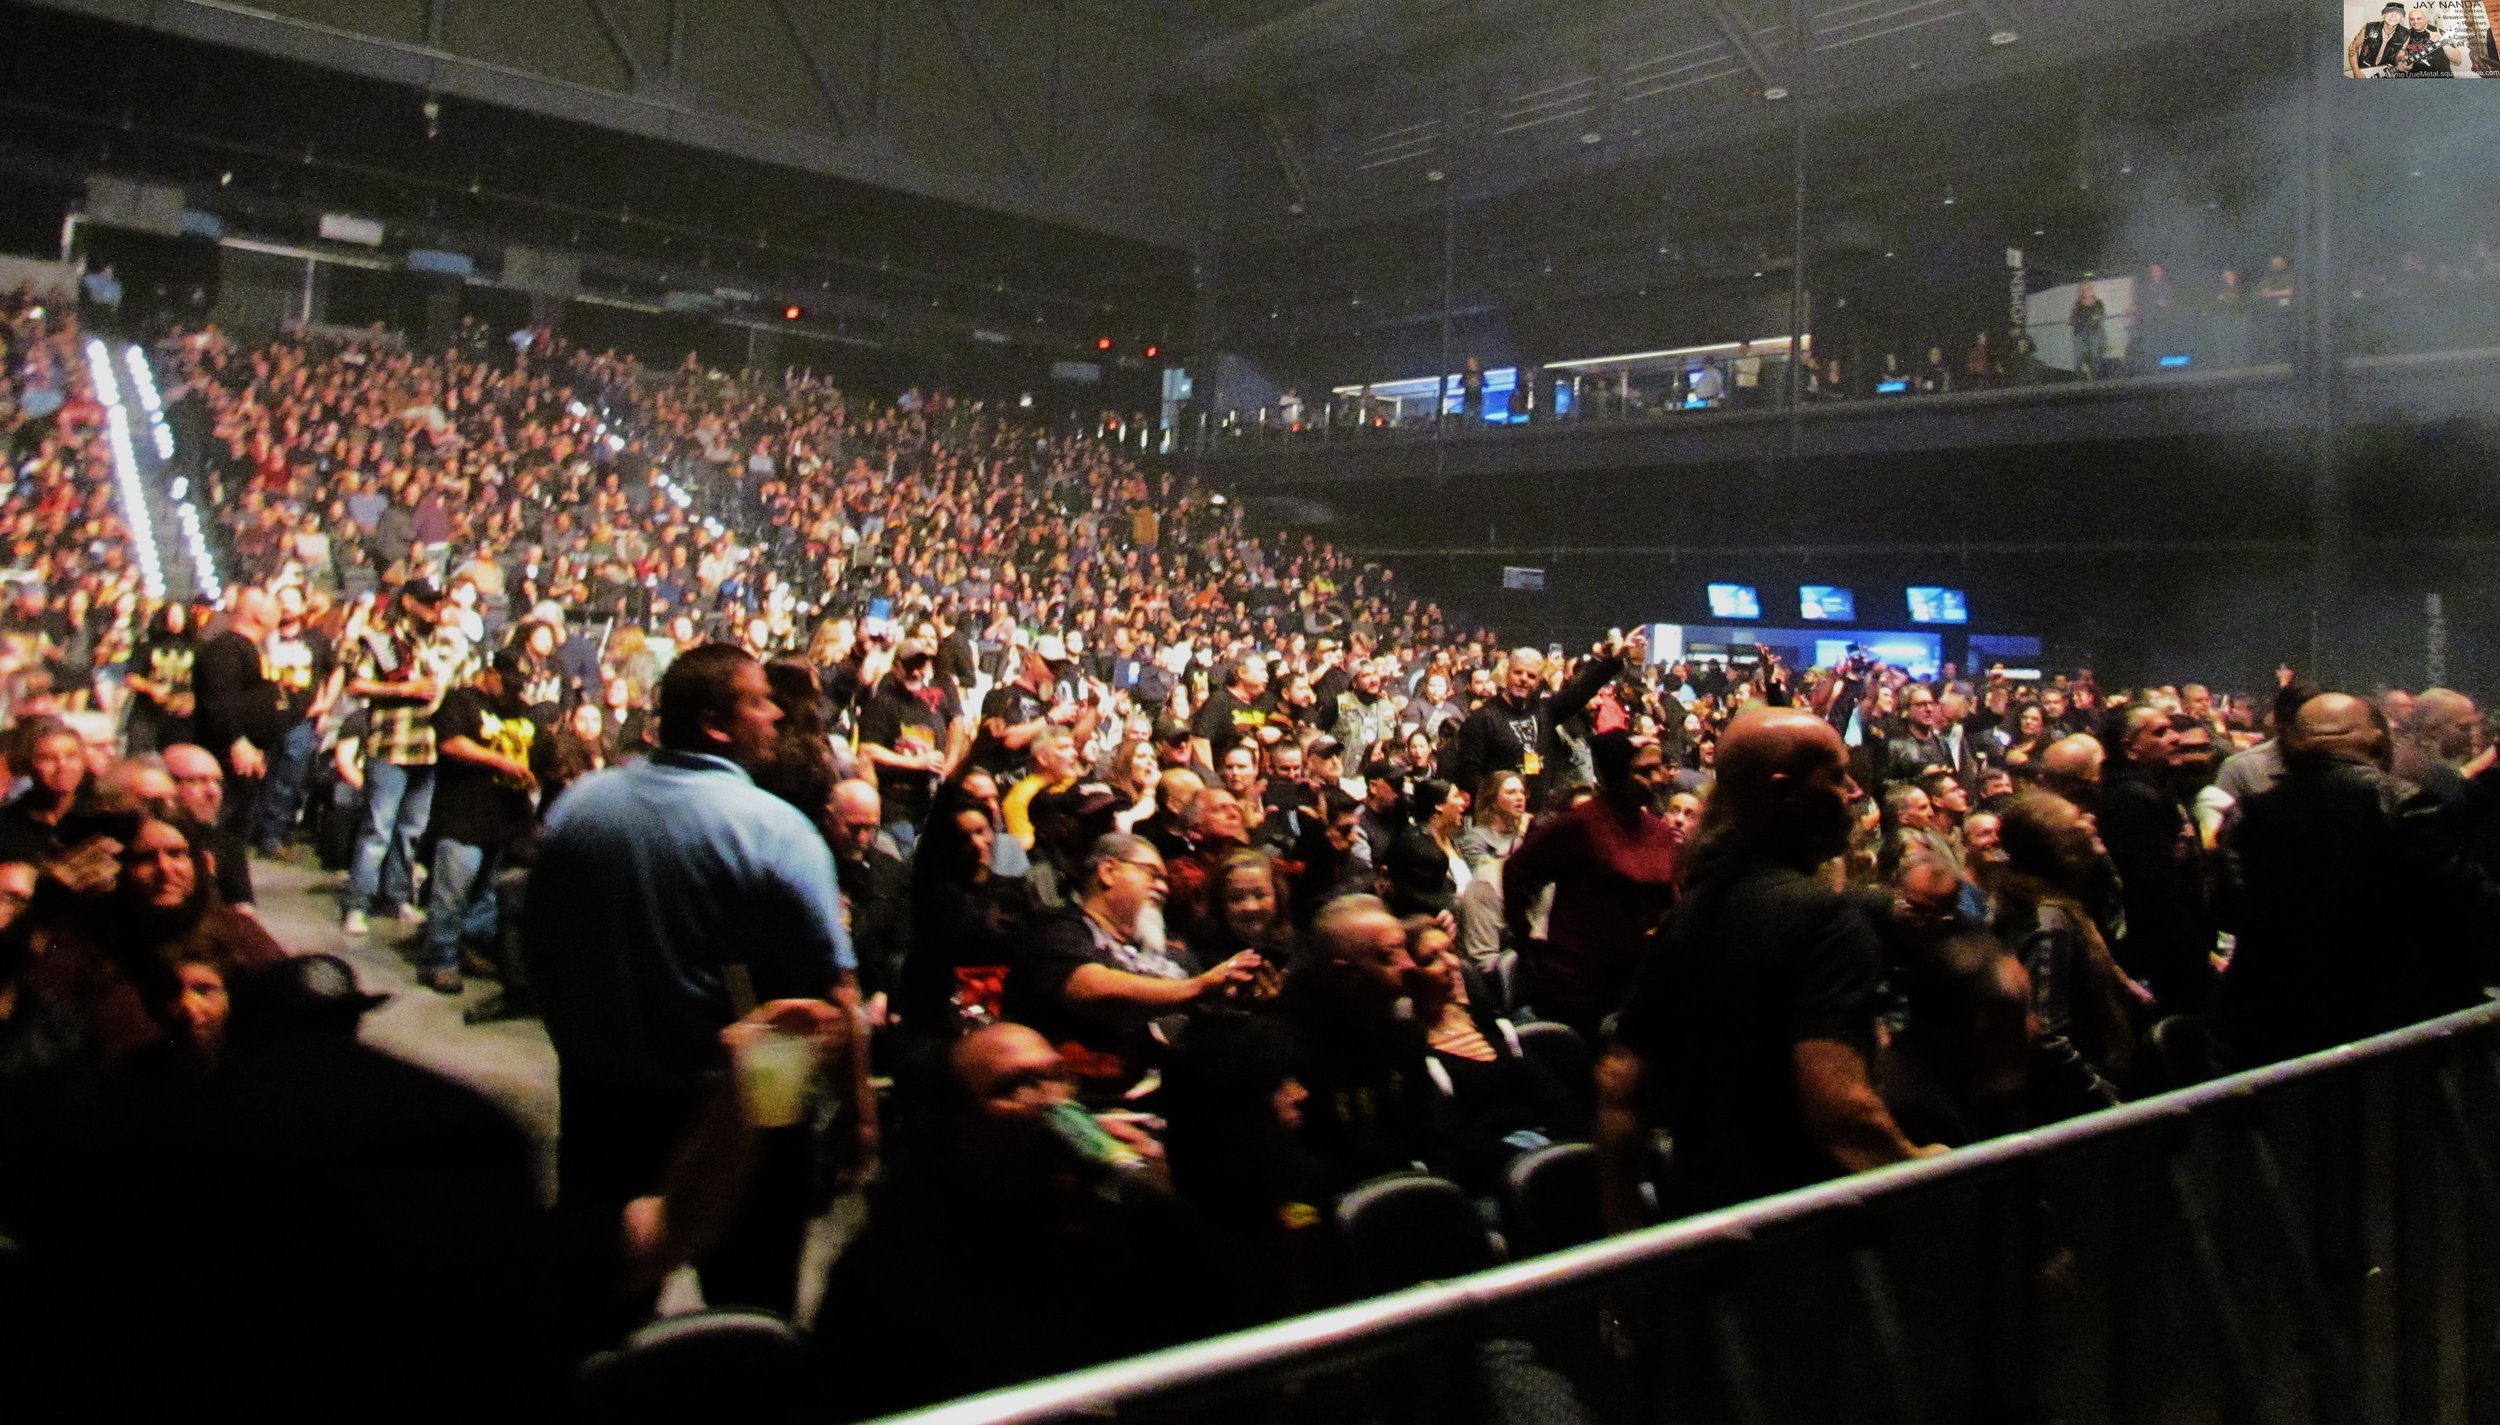  The Tech Port Center + Arena held approximately 3,000 enthusiastic Priest and Queensryche fans each night.  